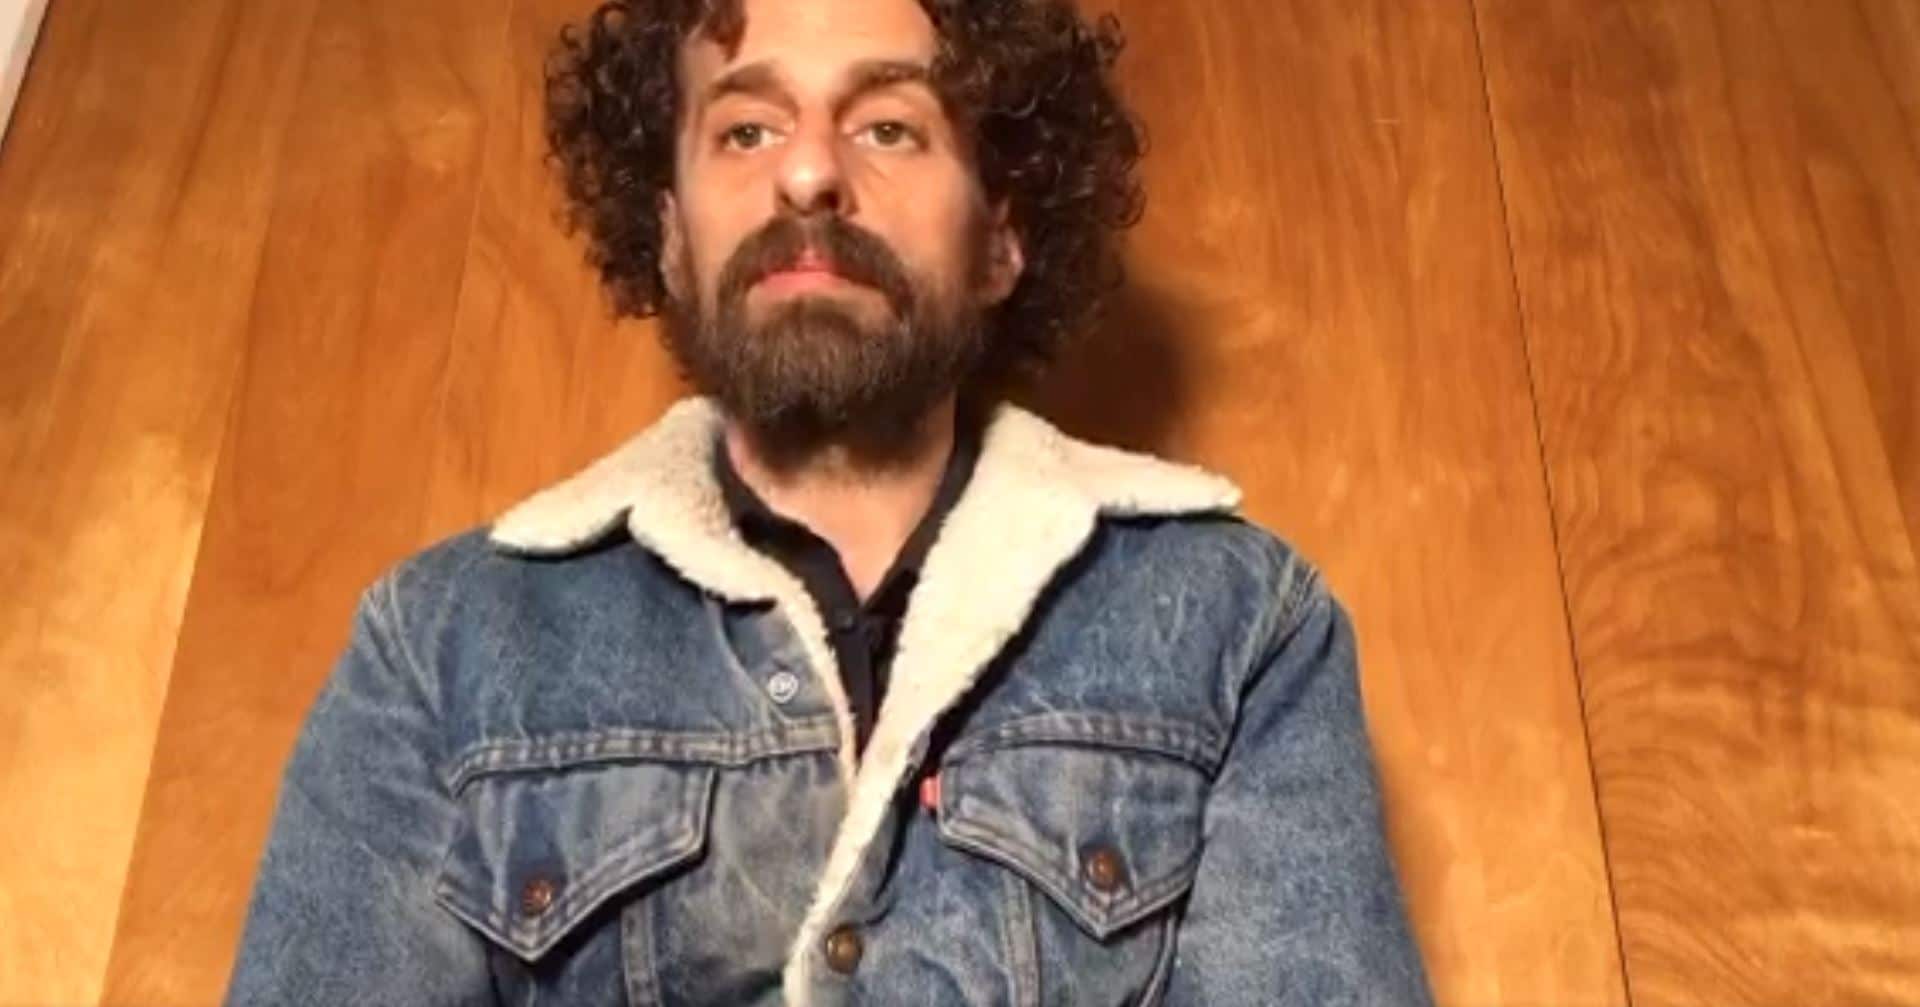 2019 05 15 10 04 21 News about isaackappy on Twitter The Haunting Last Words of Isaac Kappy: "Now, I Am One of Them"